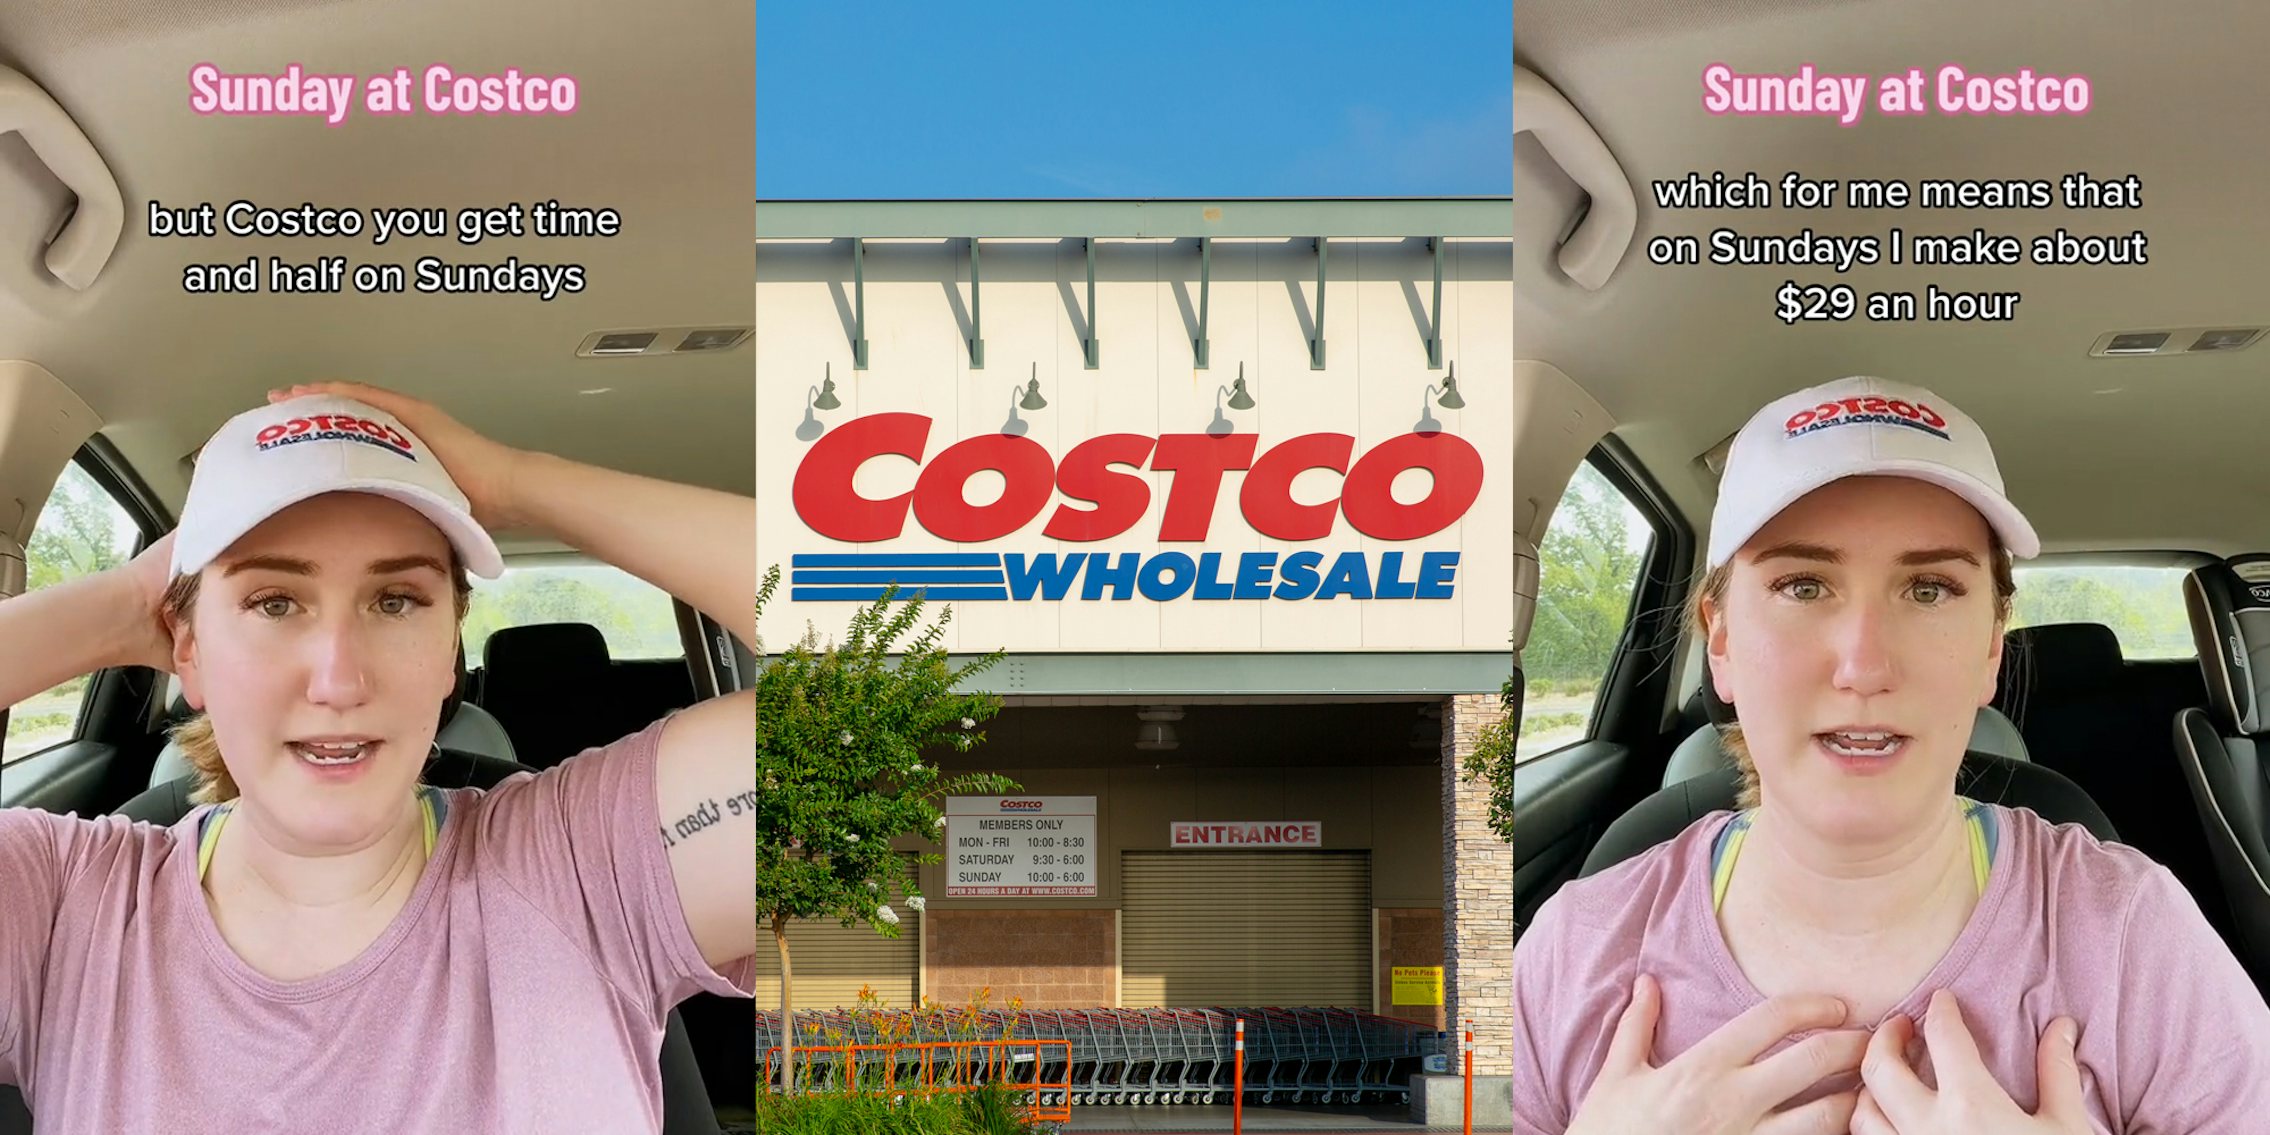 Costco employee speaking in car with caption 'Sunday at Costco' 'but Costco you get time and half on Sundays' (l) Costco entrance with sign (c) Costco employee speaking in car with caption 'Sunday at Costco' 'which for me means that on Sundays I make about $29 an hour' (r)